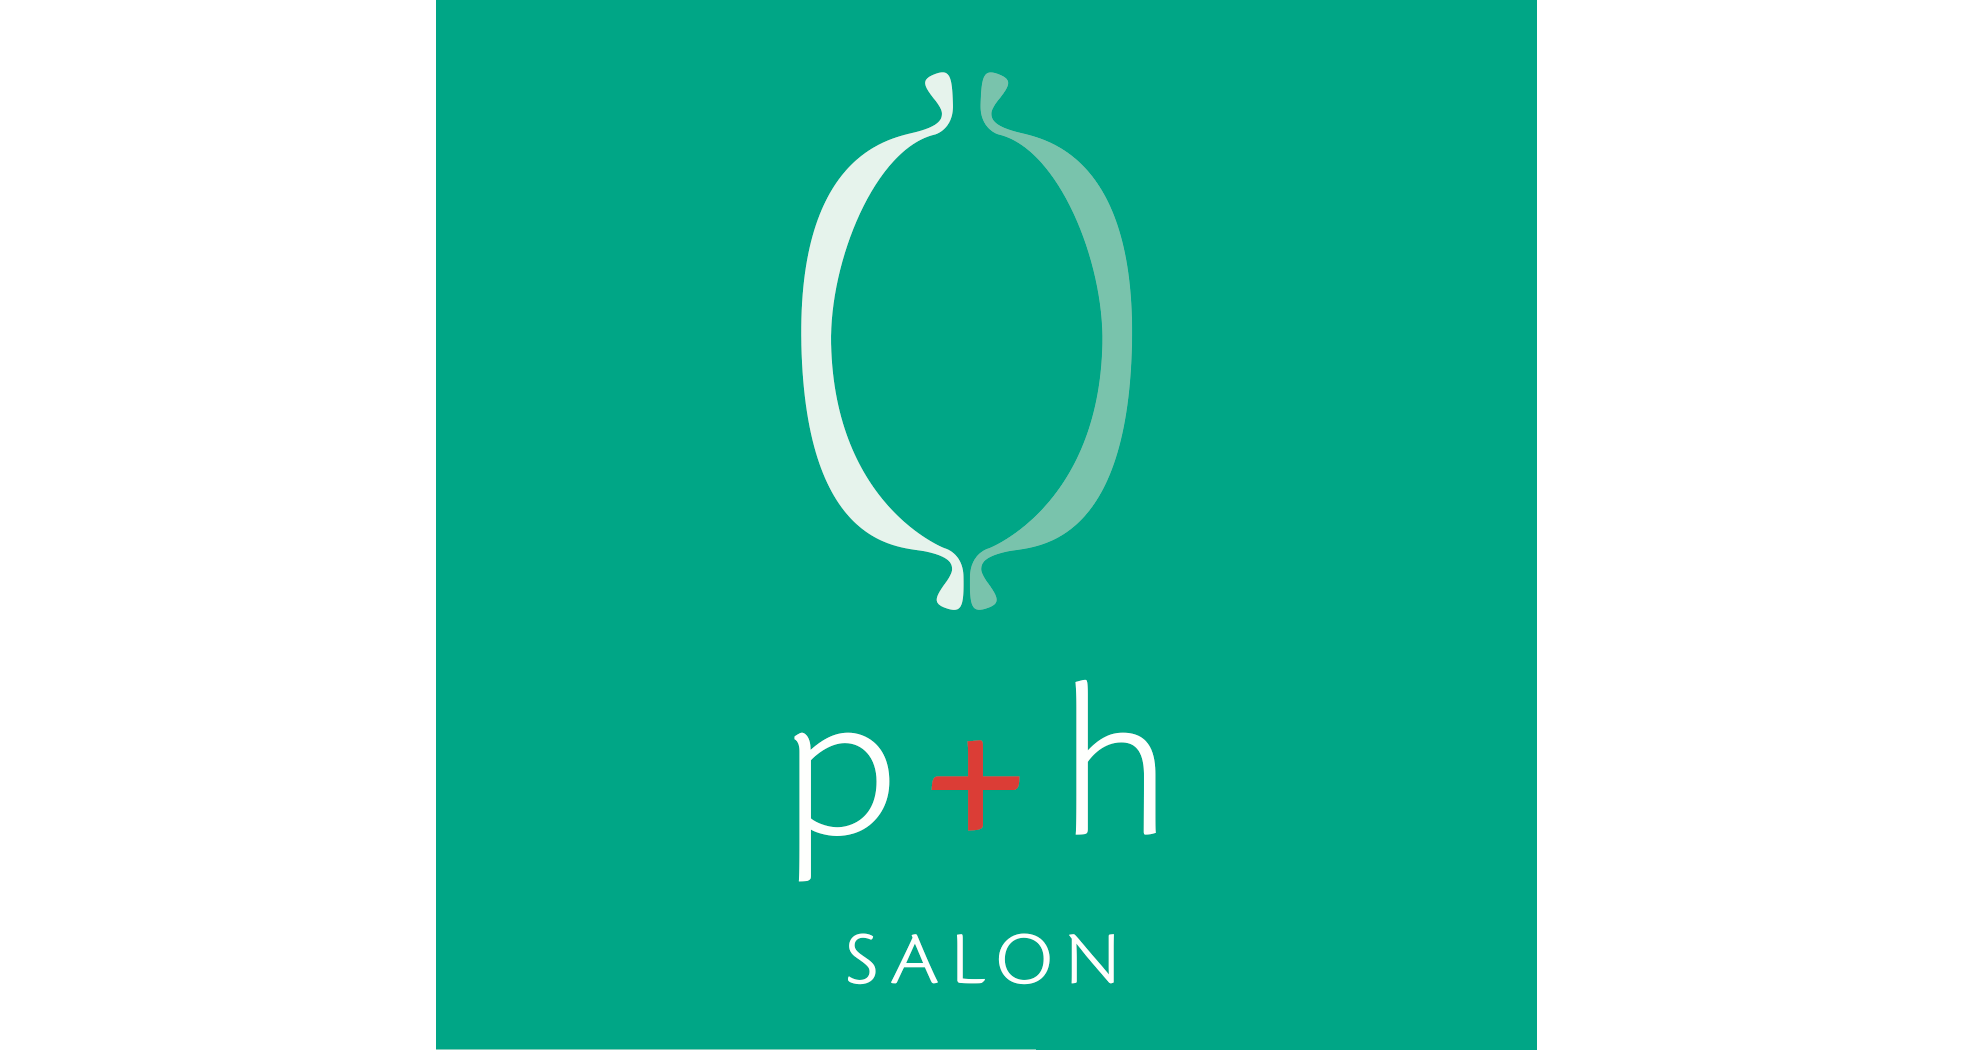 Home to Incredible Stylists - Ponytails + Horseshoes